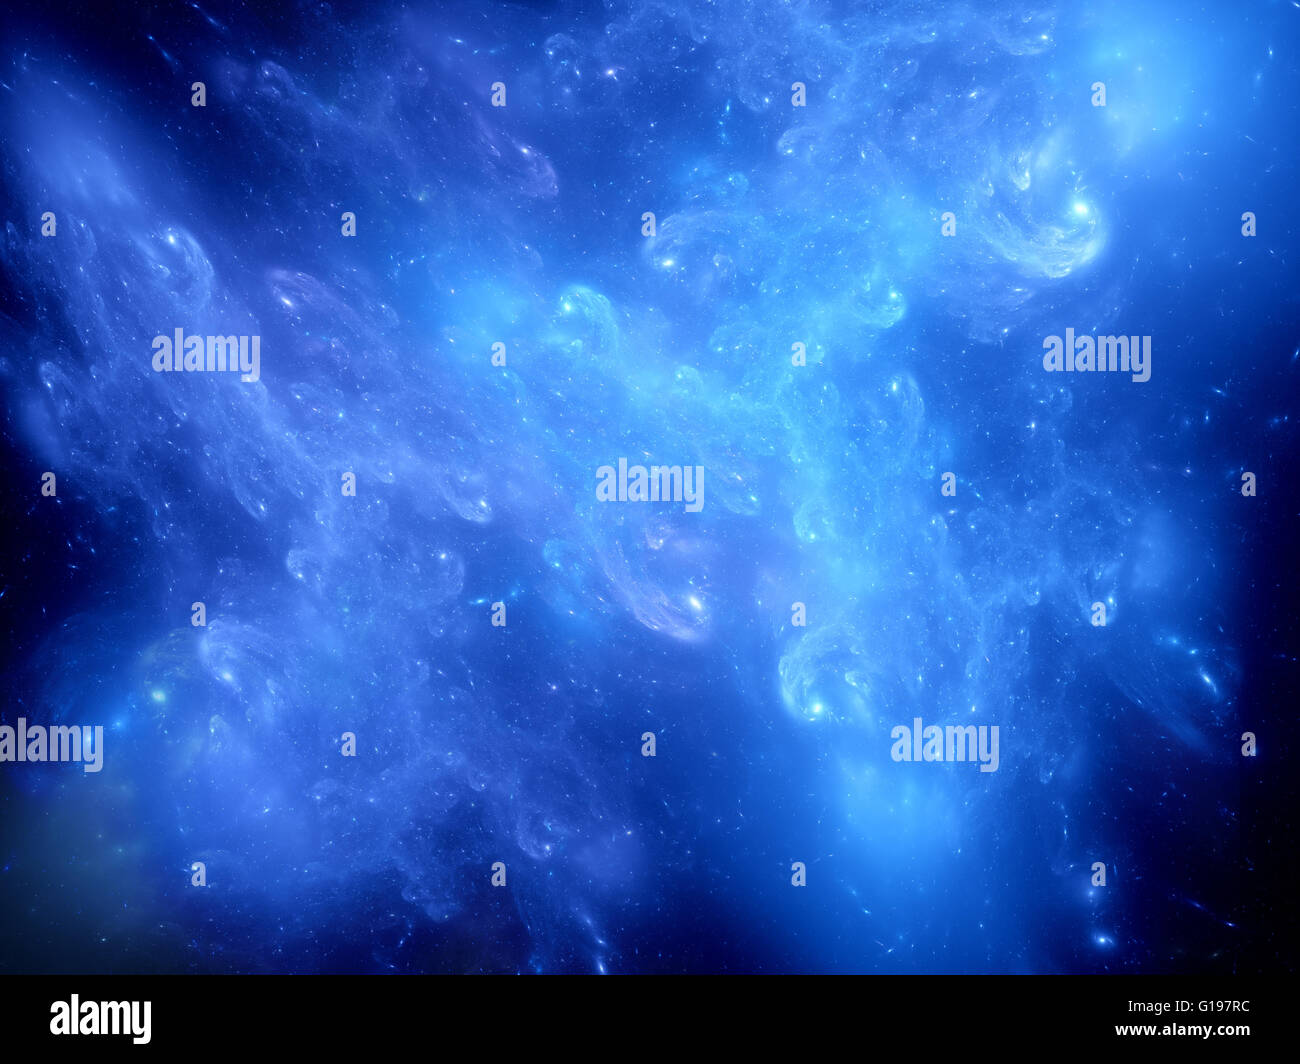 Blue glowing nebula in deep space, computer generated abstract background Stock Photo